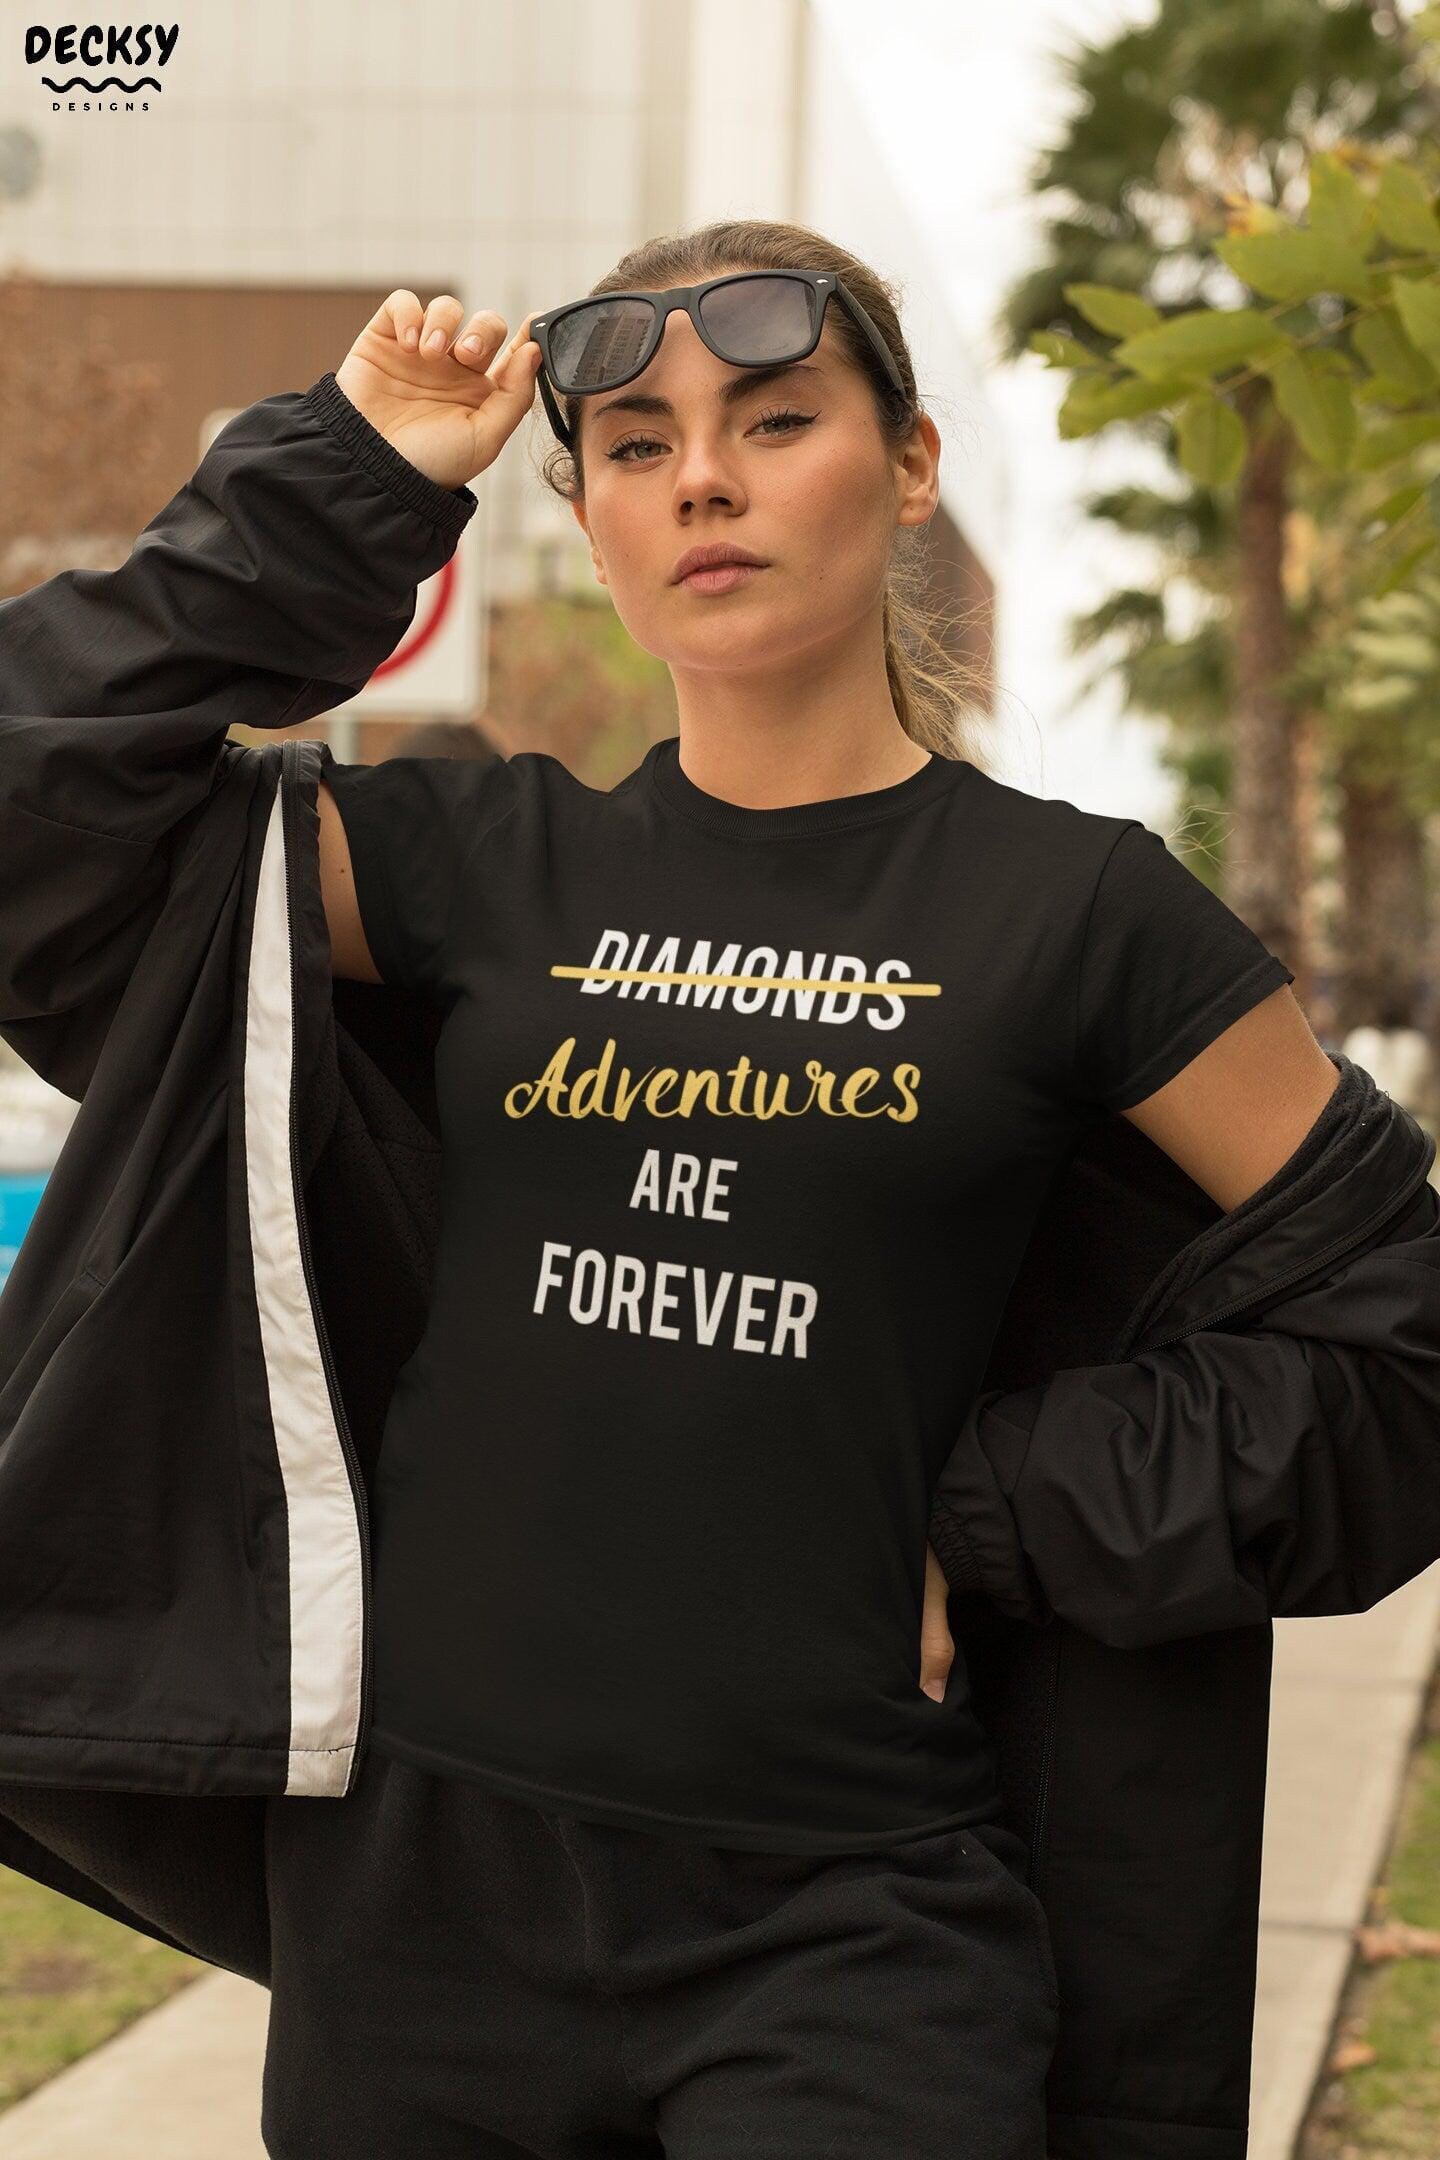 Adventure Shirt, Outdoor Hiking Gift Tee-Clothing:Gender-Neutral Adult Clothing:Tops & Tees:T-shirts:Graphic Tees-DecksyDesigns